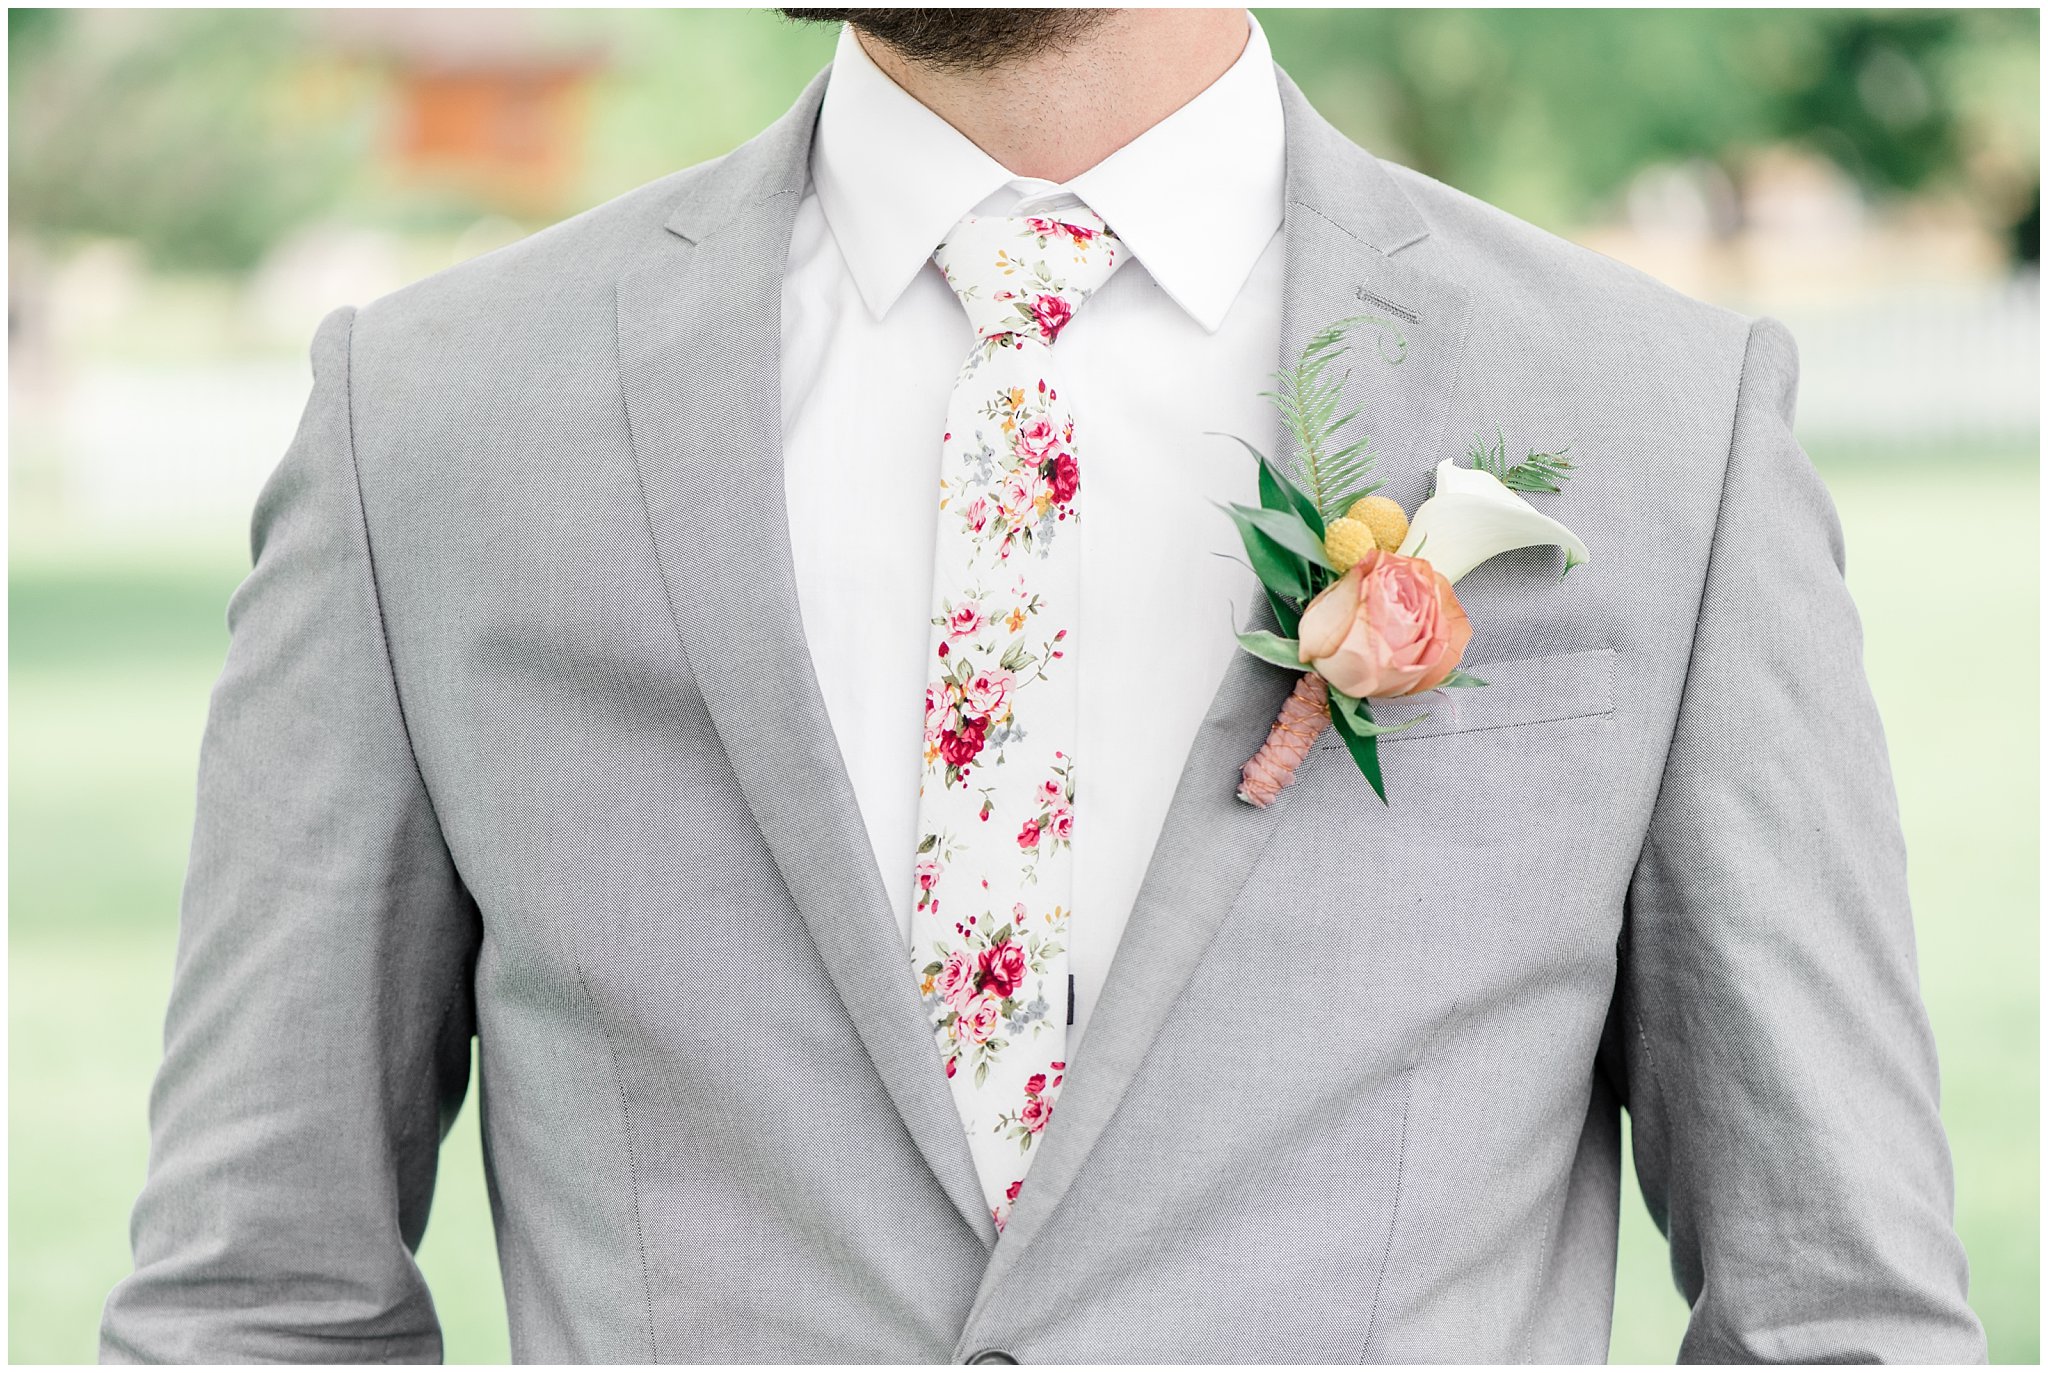 Groom detail of floral tie, boutonniere and grey suit | This is the Place Heritage Park | Green and Pink Garden Wedding | Jessie and Dallin Photography